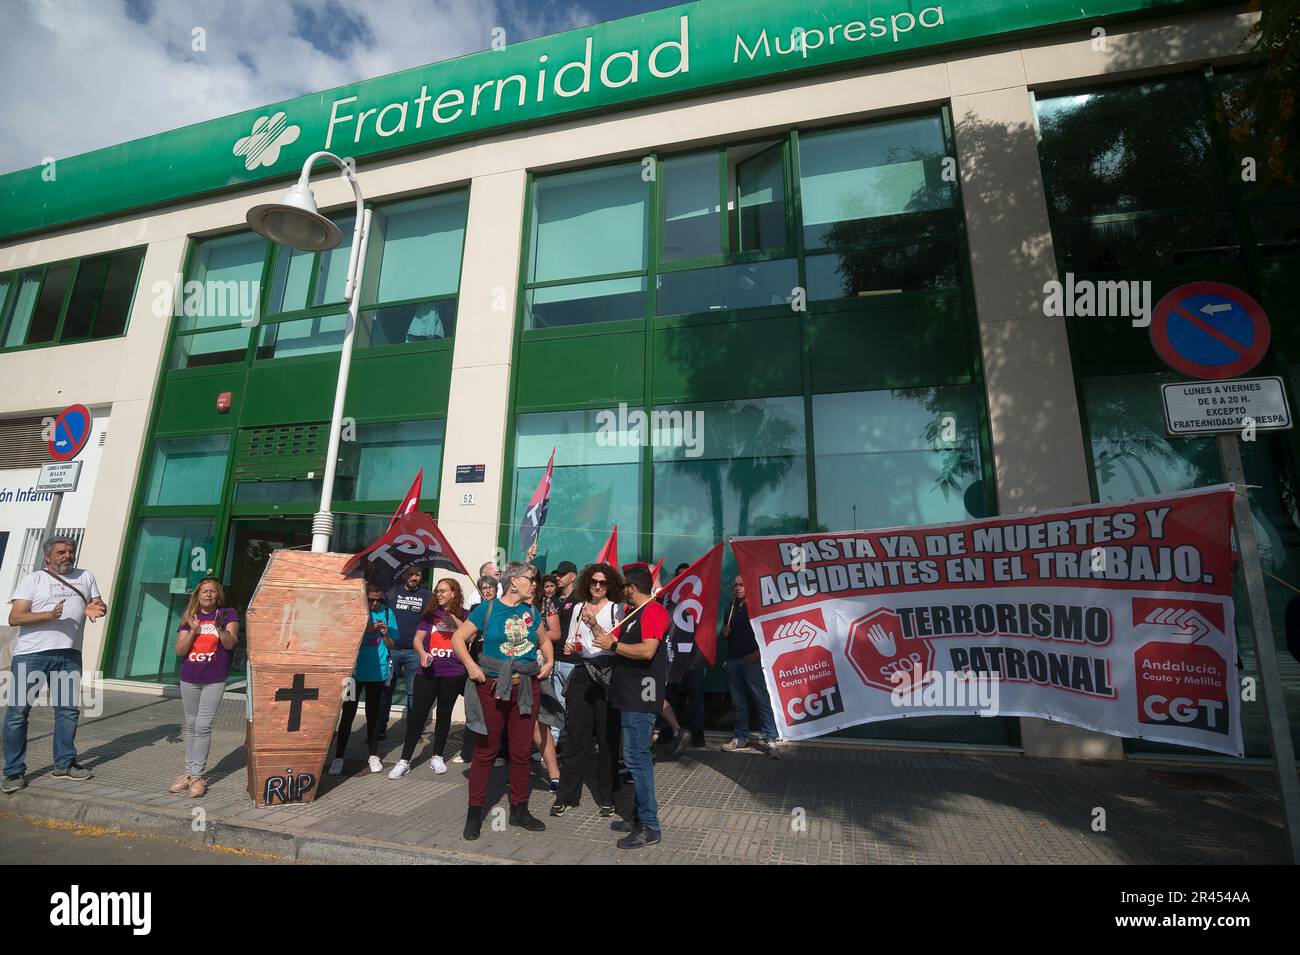 Malaga, Spain. 26th May, 2023. Protesters are seen holding flags and a large banner during a protest against workplace accidents in front of a mutual insurance company, before taking part in a tribute to workers who died in labor accidents in the year 2022 in Andalusia. Dozens of people called by the General Workers Conference demonstrated to demand safety measures and accident prevention in the workplace, along with a symbolic homage at the beach. Credit: SOPA Images Limited/Alamy Live News Stock Photo